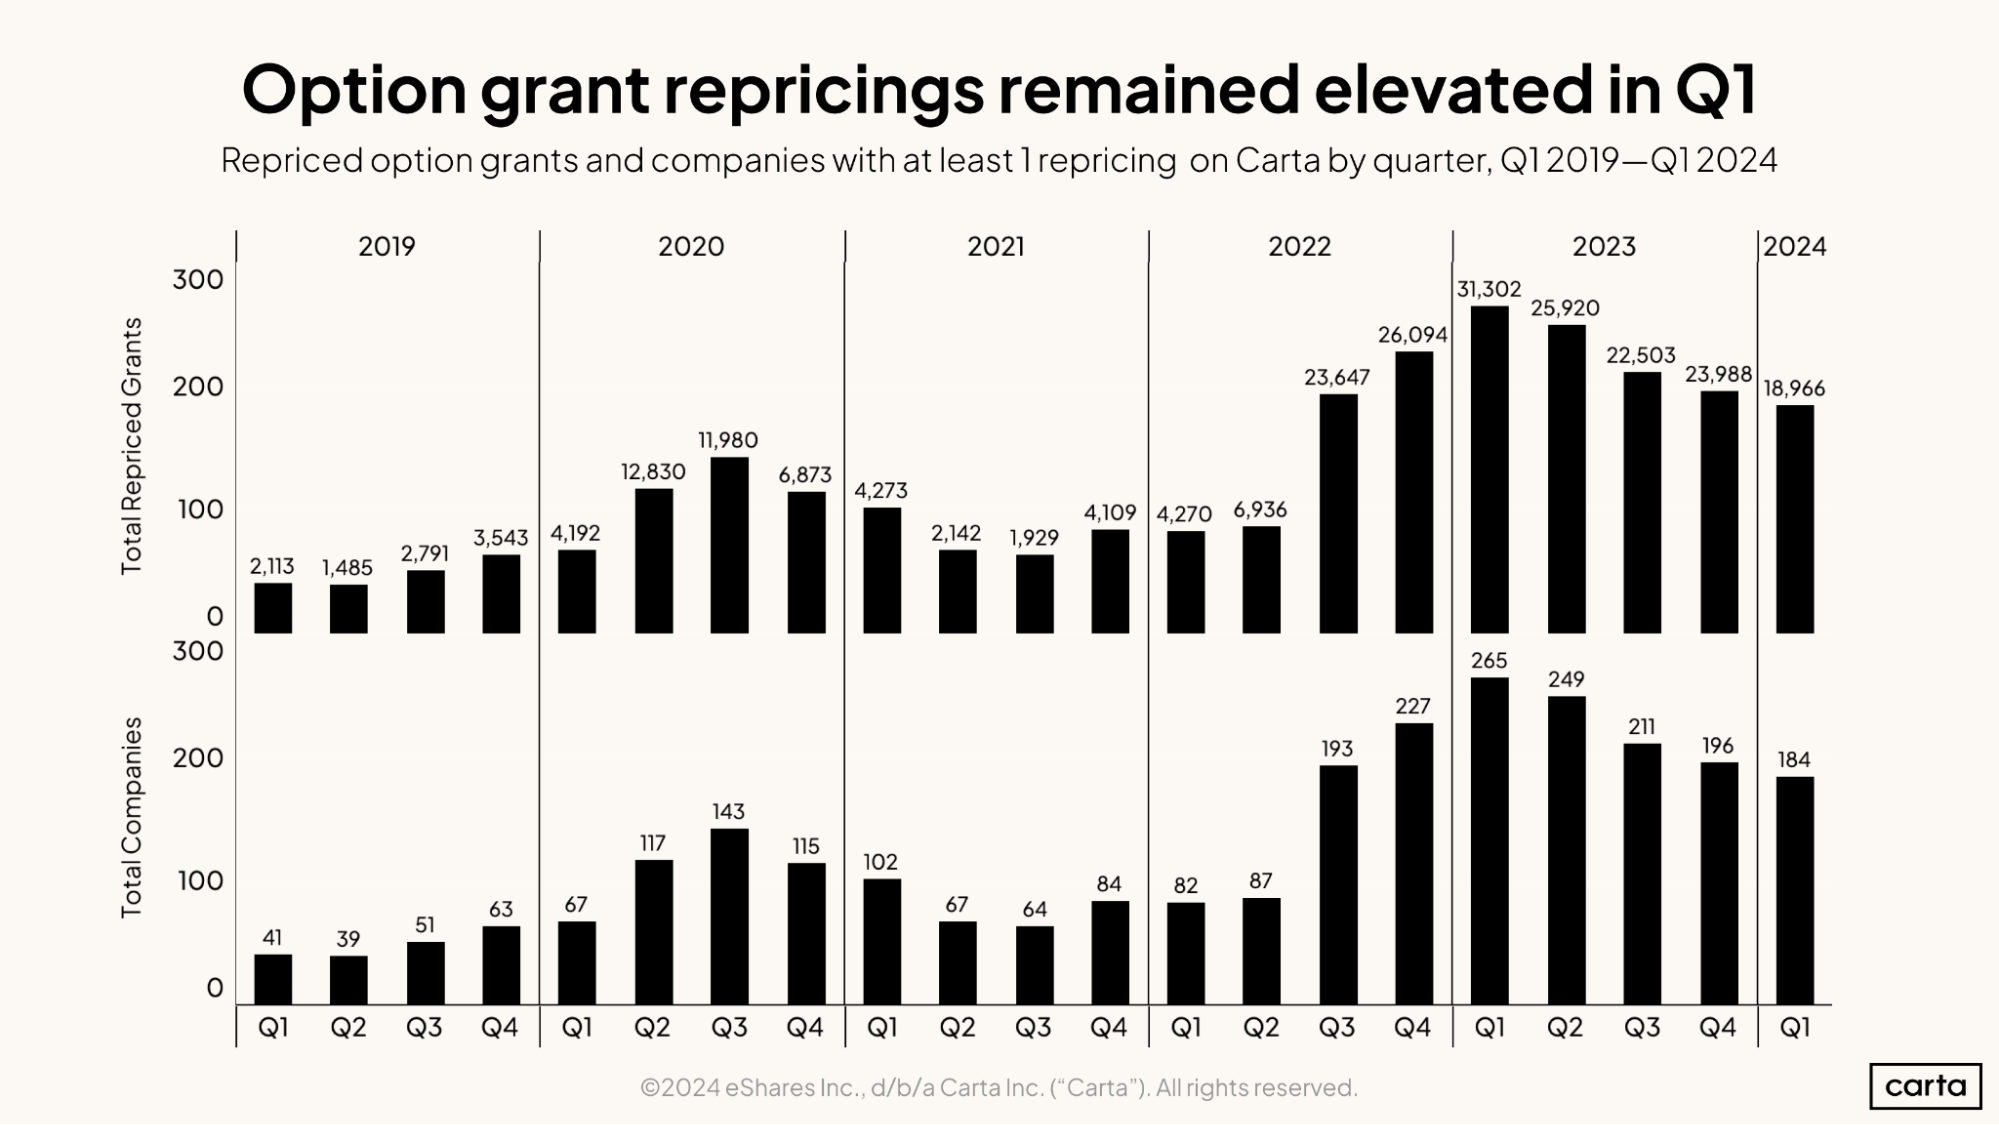 Option grant repricings remained elevated in Q1